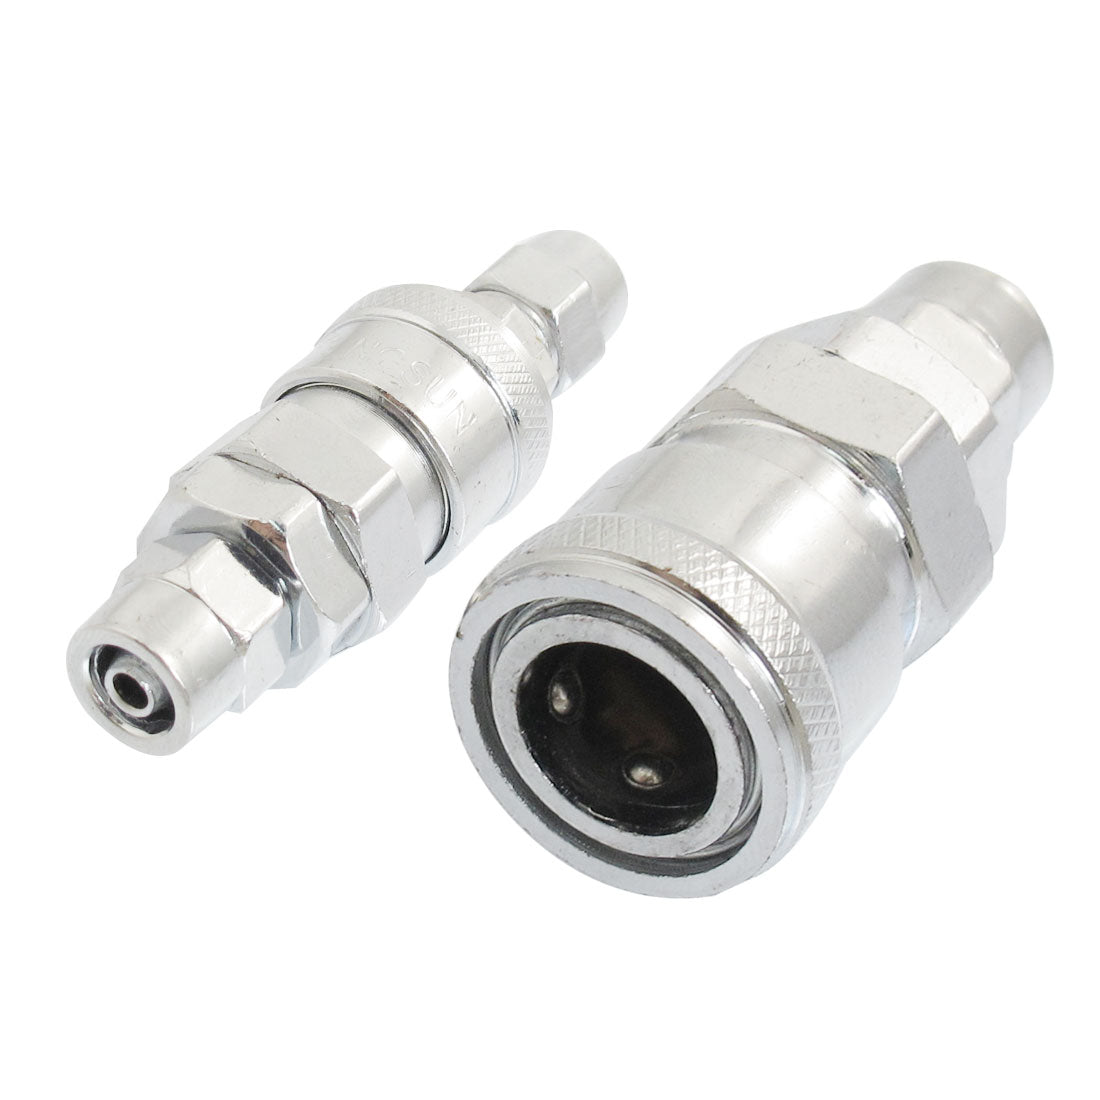 uxcell Uxcell 5mm x 8mm Pneumatic Air Hose Quick Fitting Coupler Connector Adapter